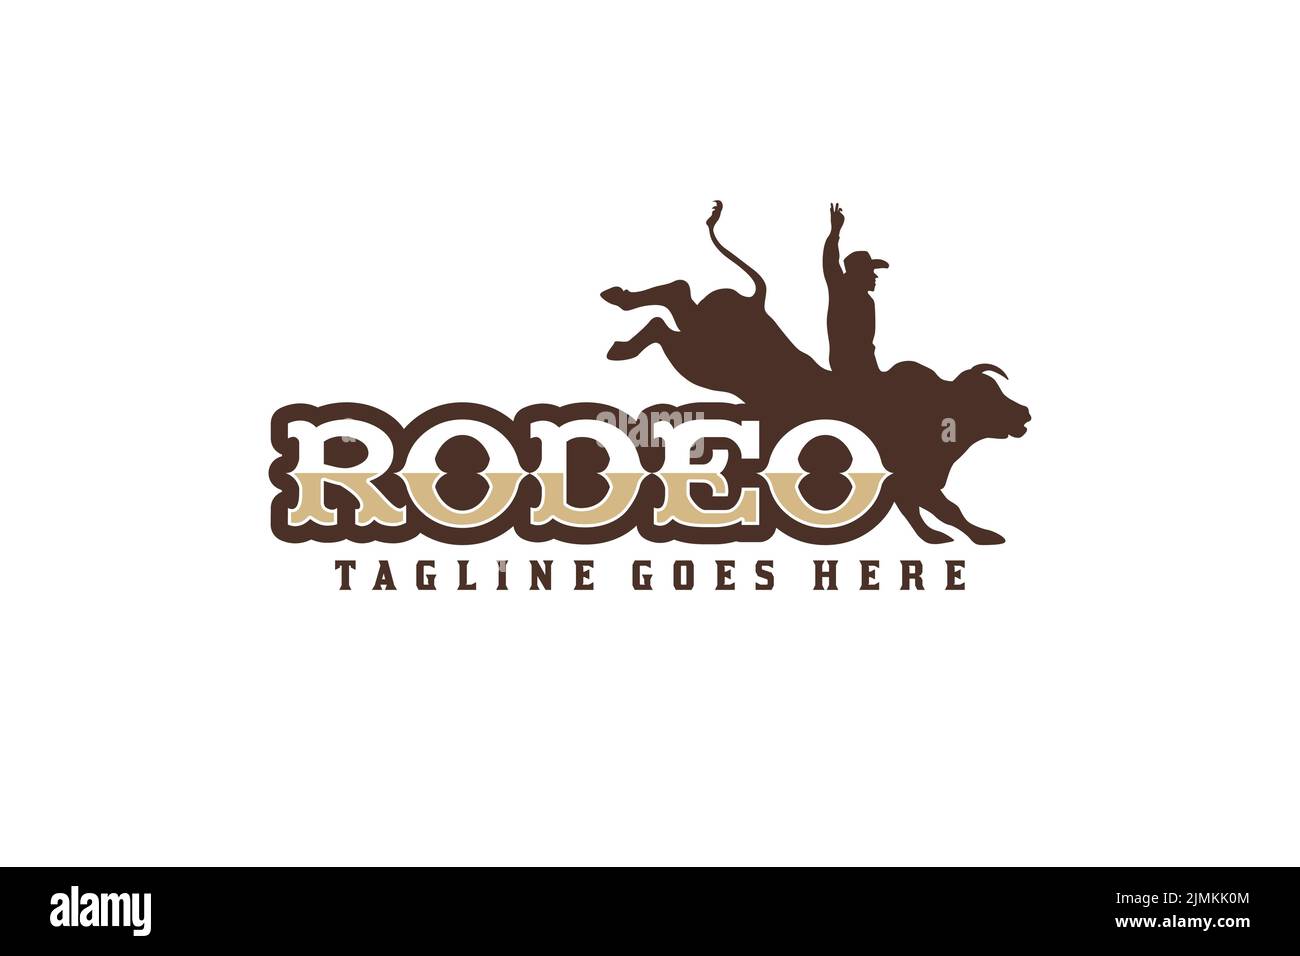 Rodeo Typography With Bull Rider Silhouette For matador Logo Design Stock Vector